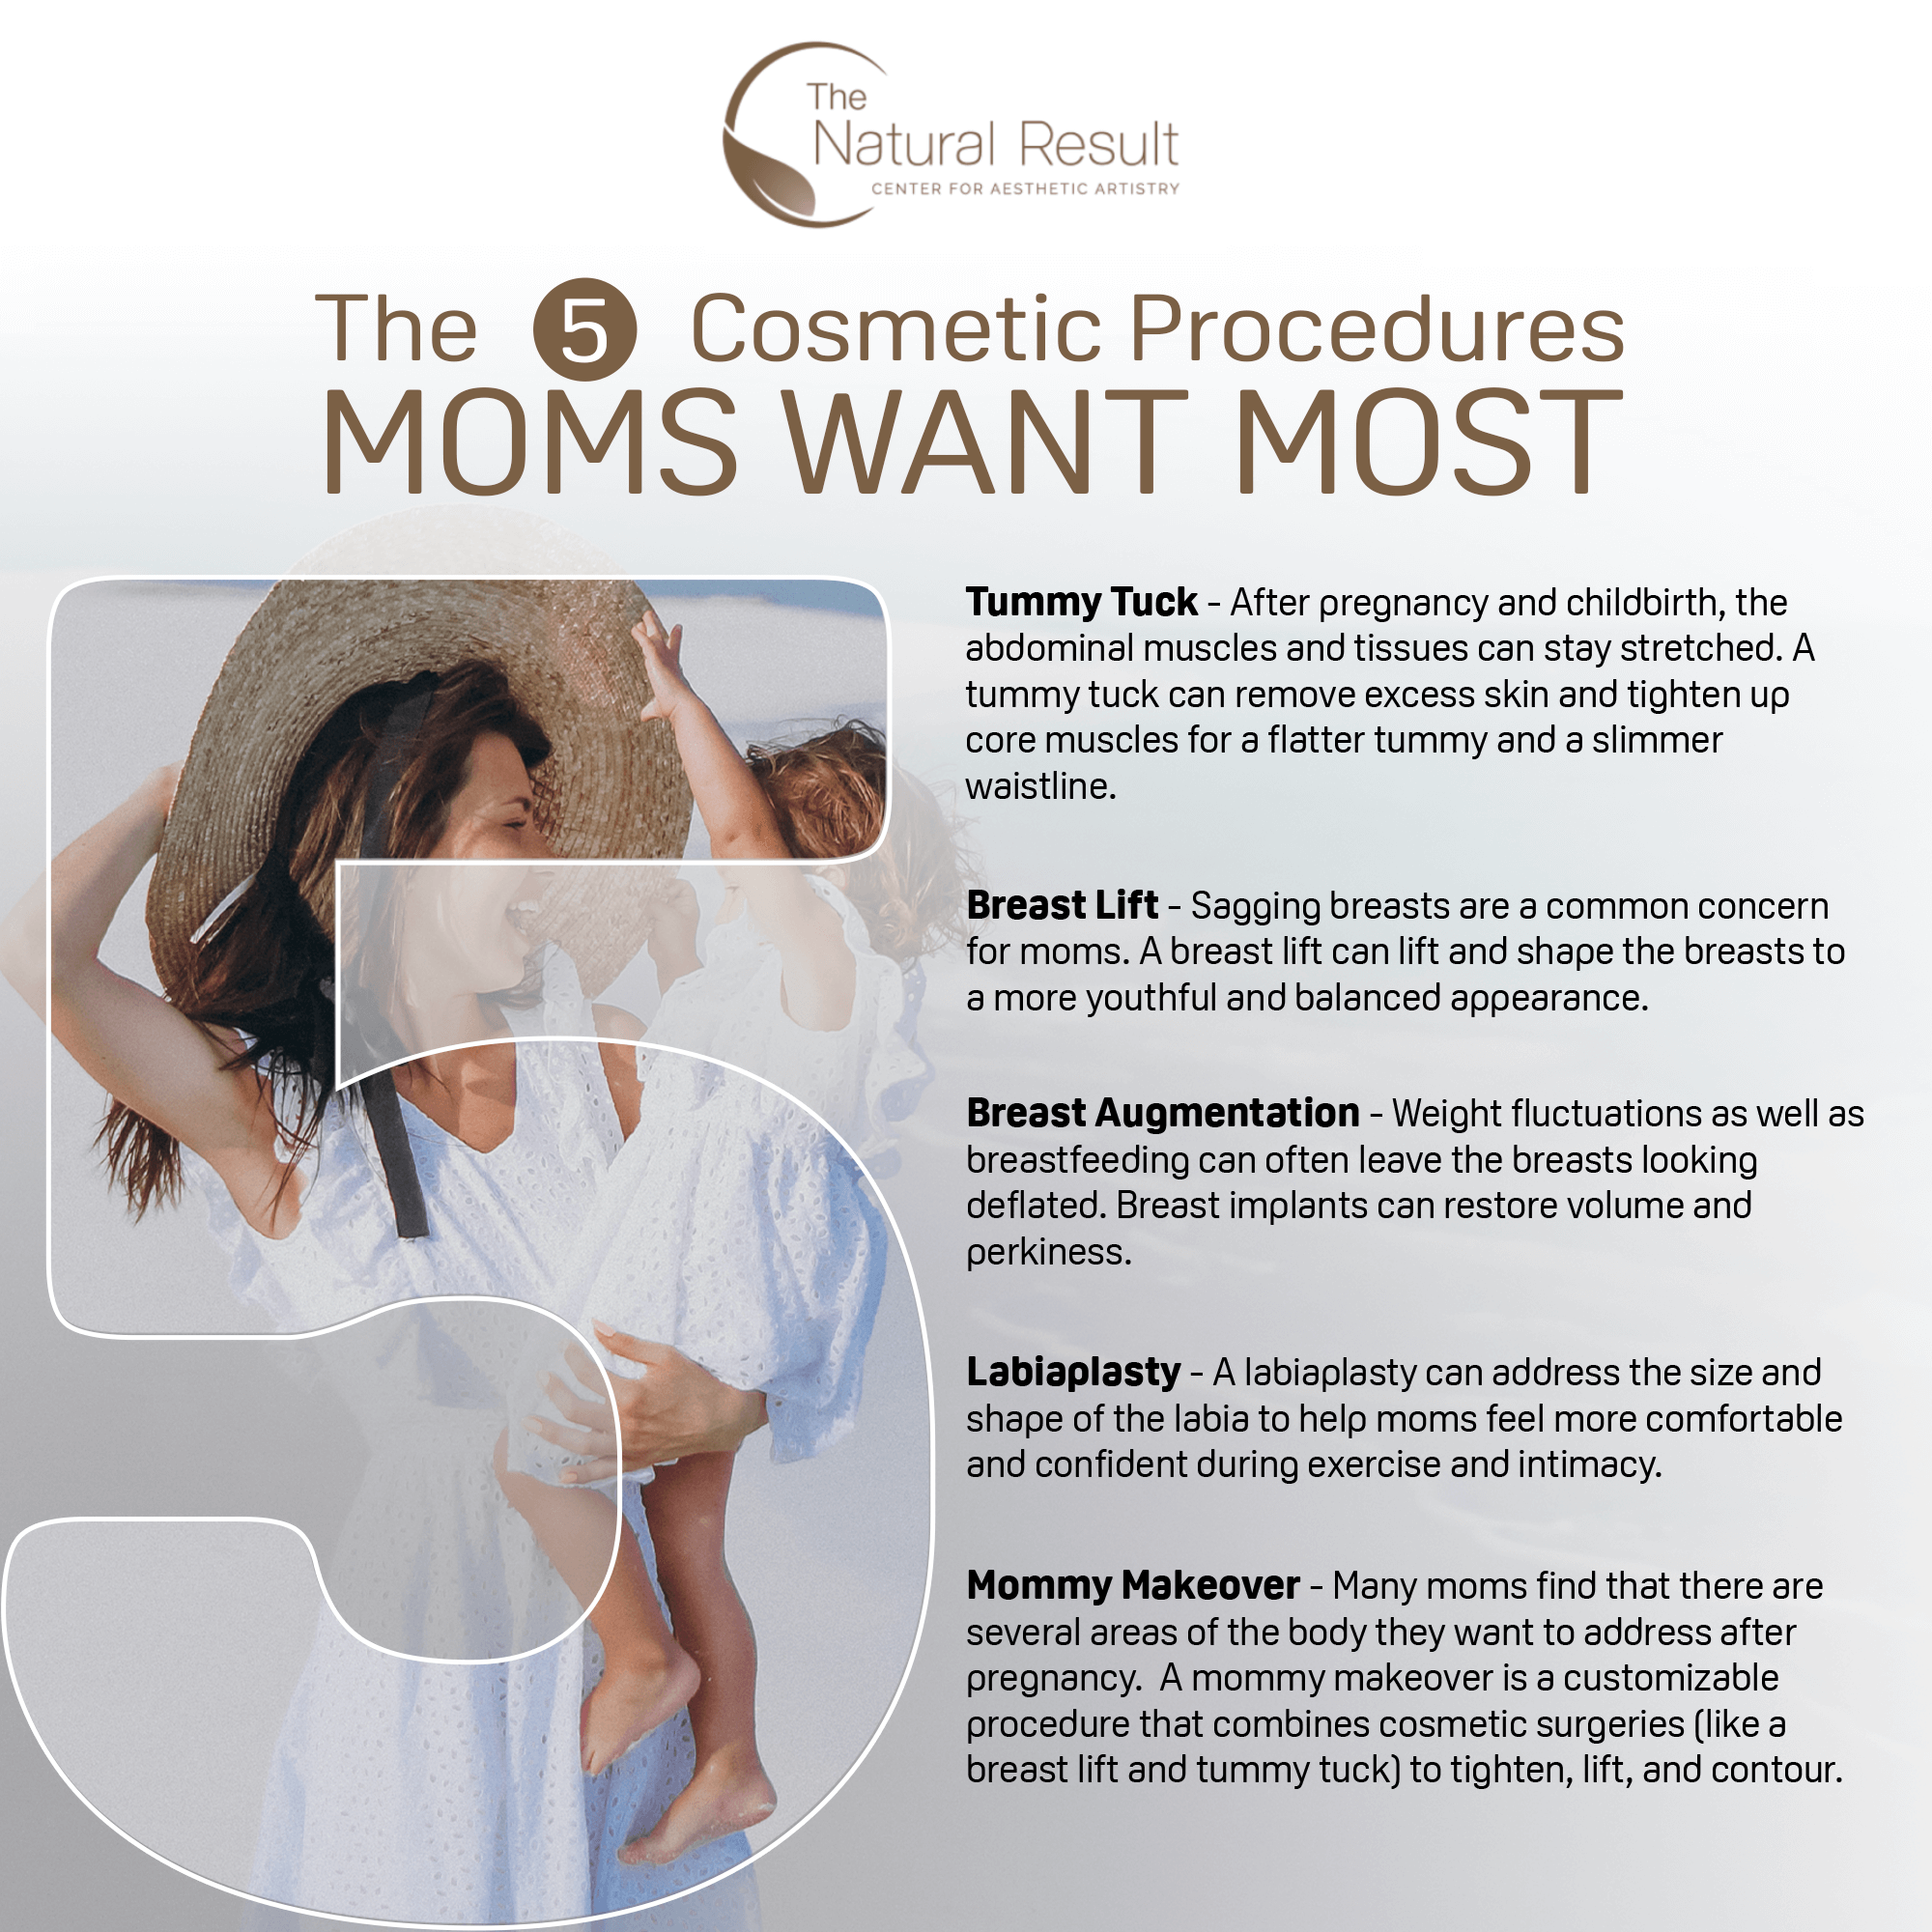 The 5 Cosmetic Procedures MOMS WANT MOST